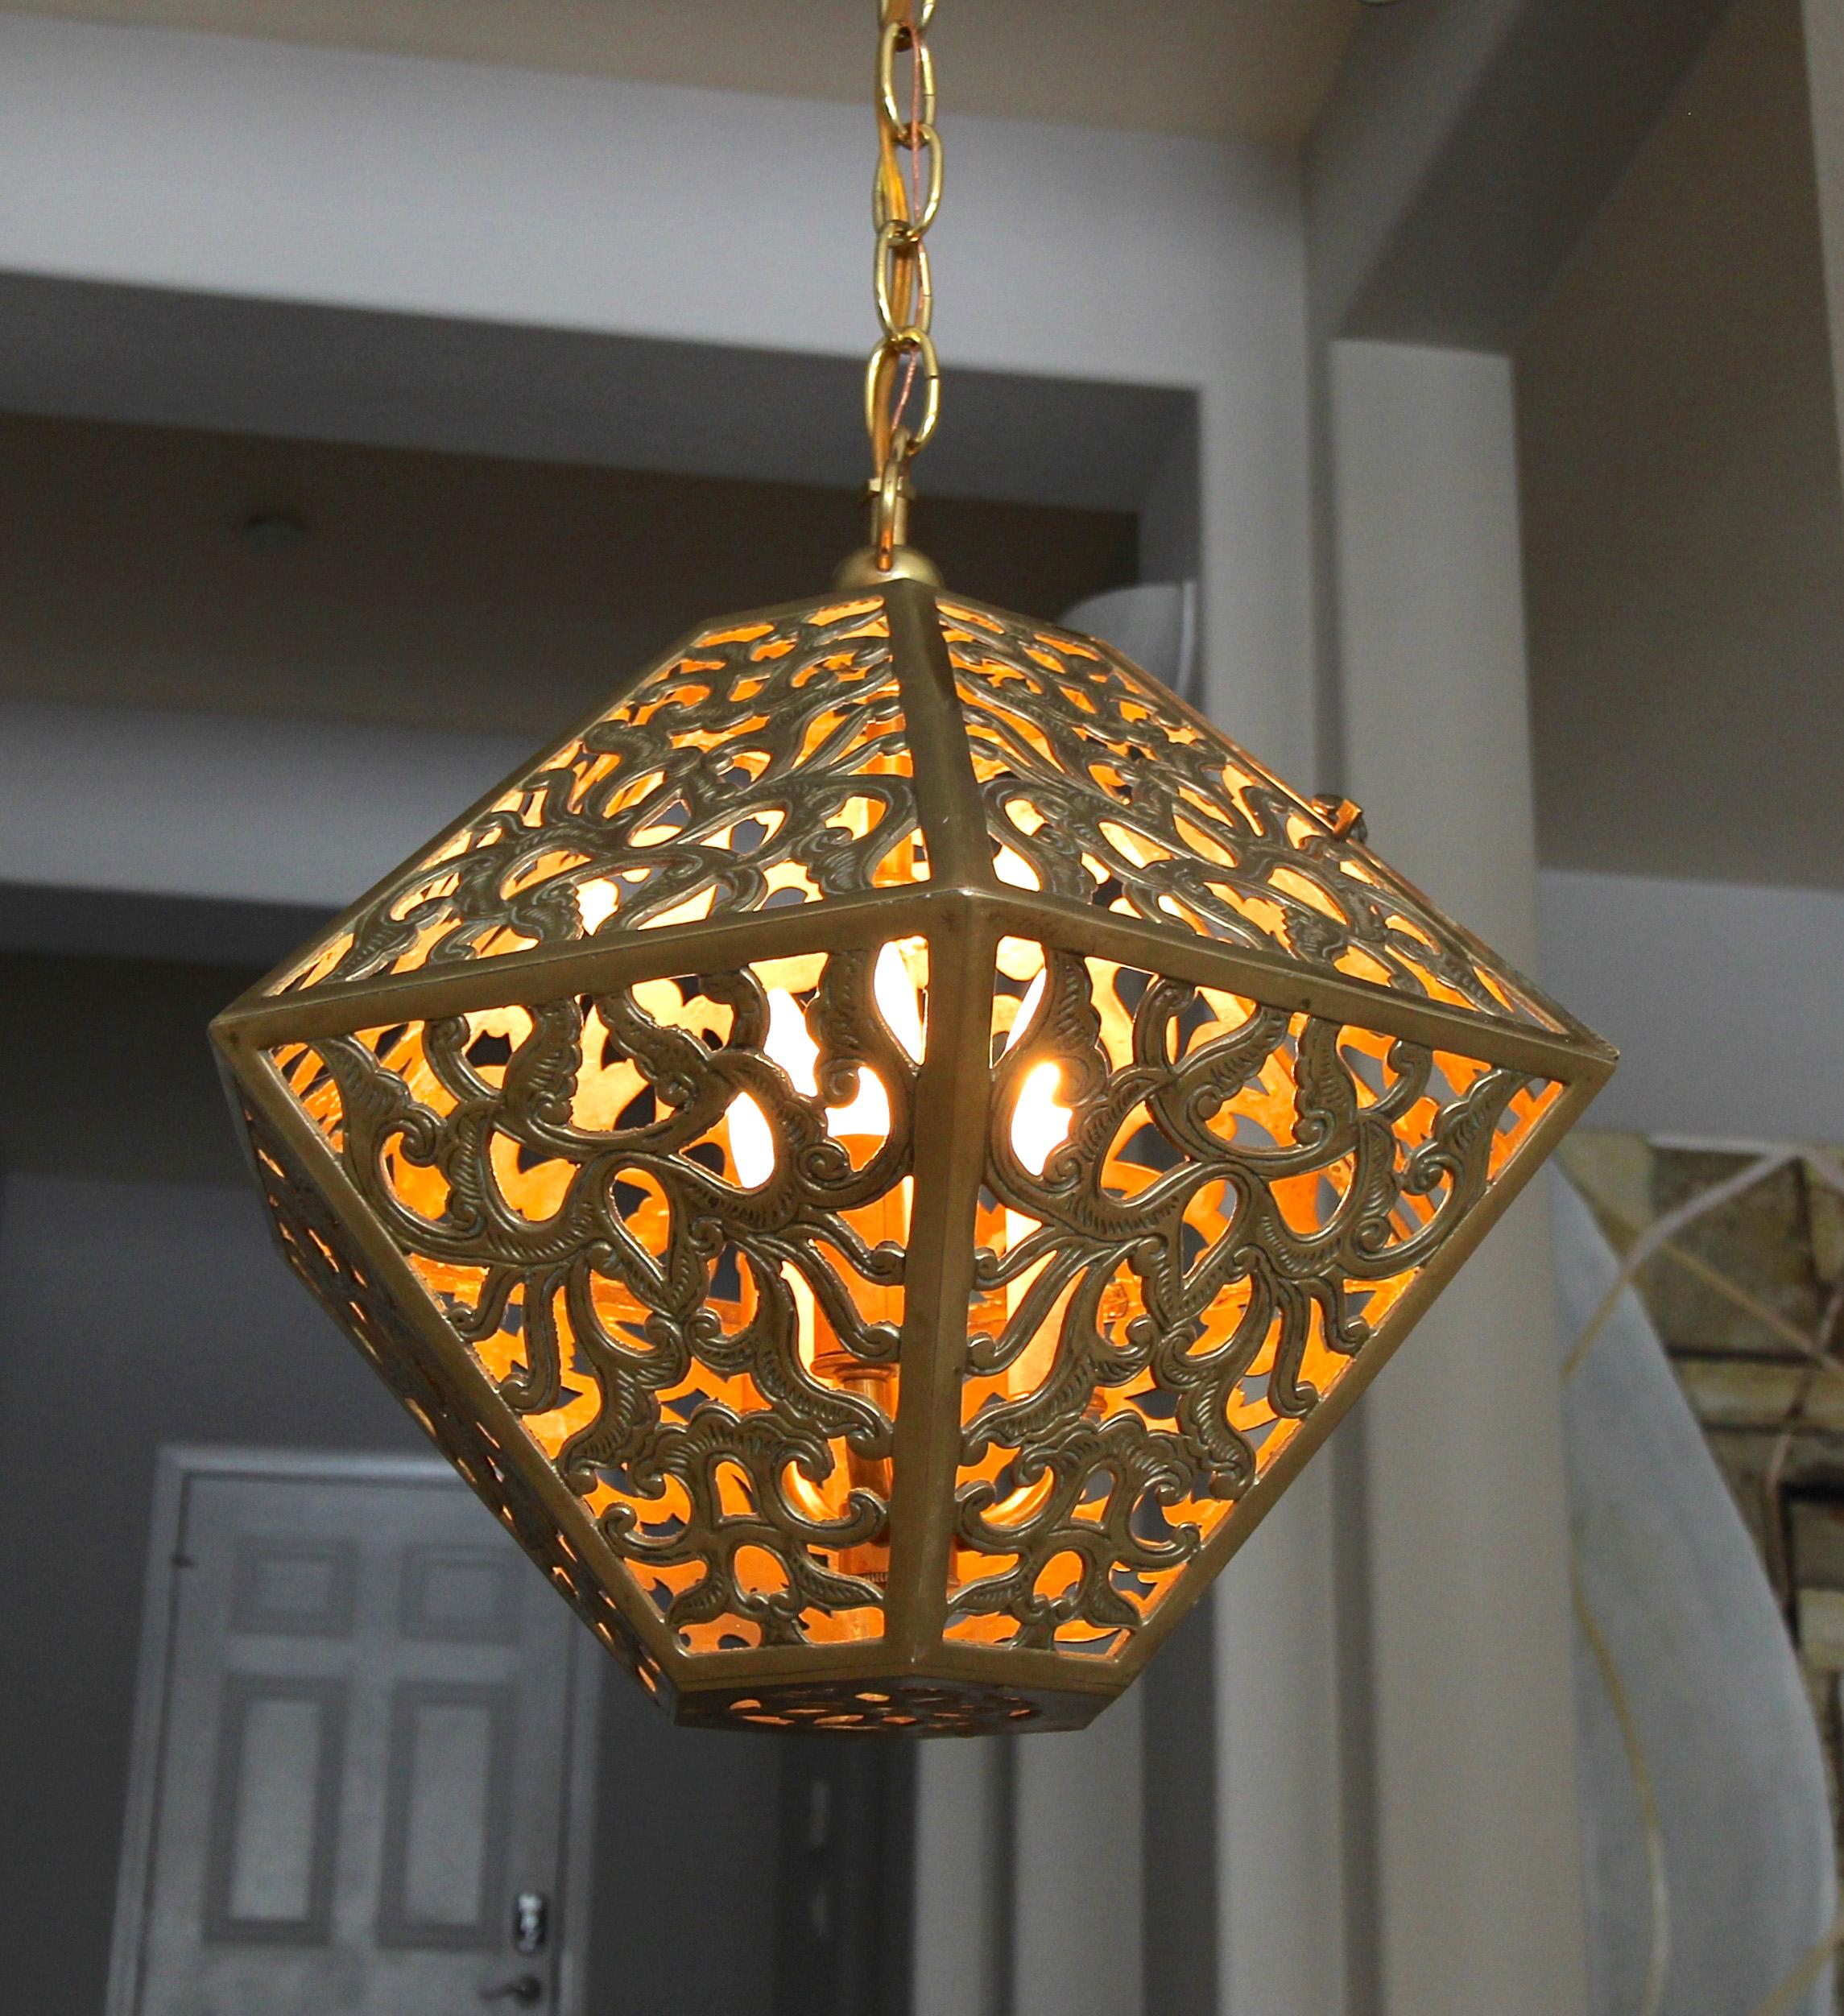 Brass diamond shape (12 sided) Asian ceiling or pendant light with scrolling arabesque patterns. Handcrafted from solid brass in Japan in the 1950s, this pendant has been refitted with a custom brass triple light cluster for a more contemporary